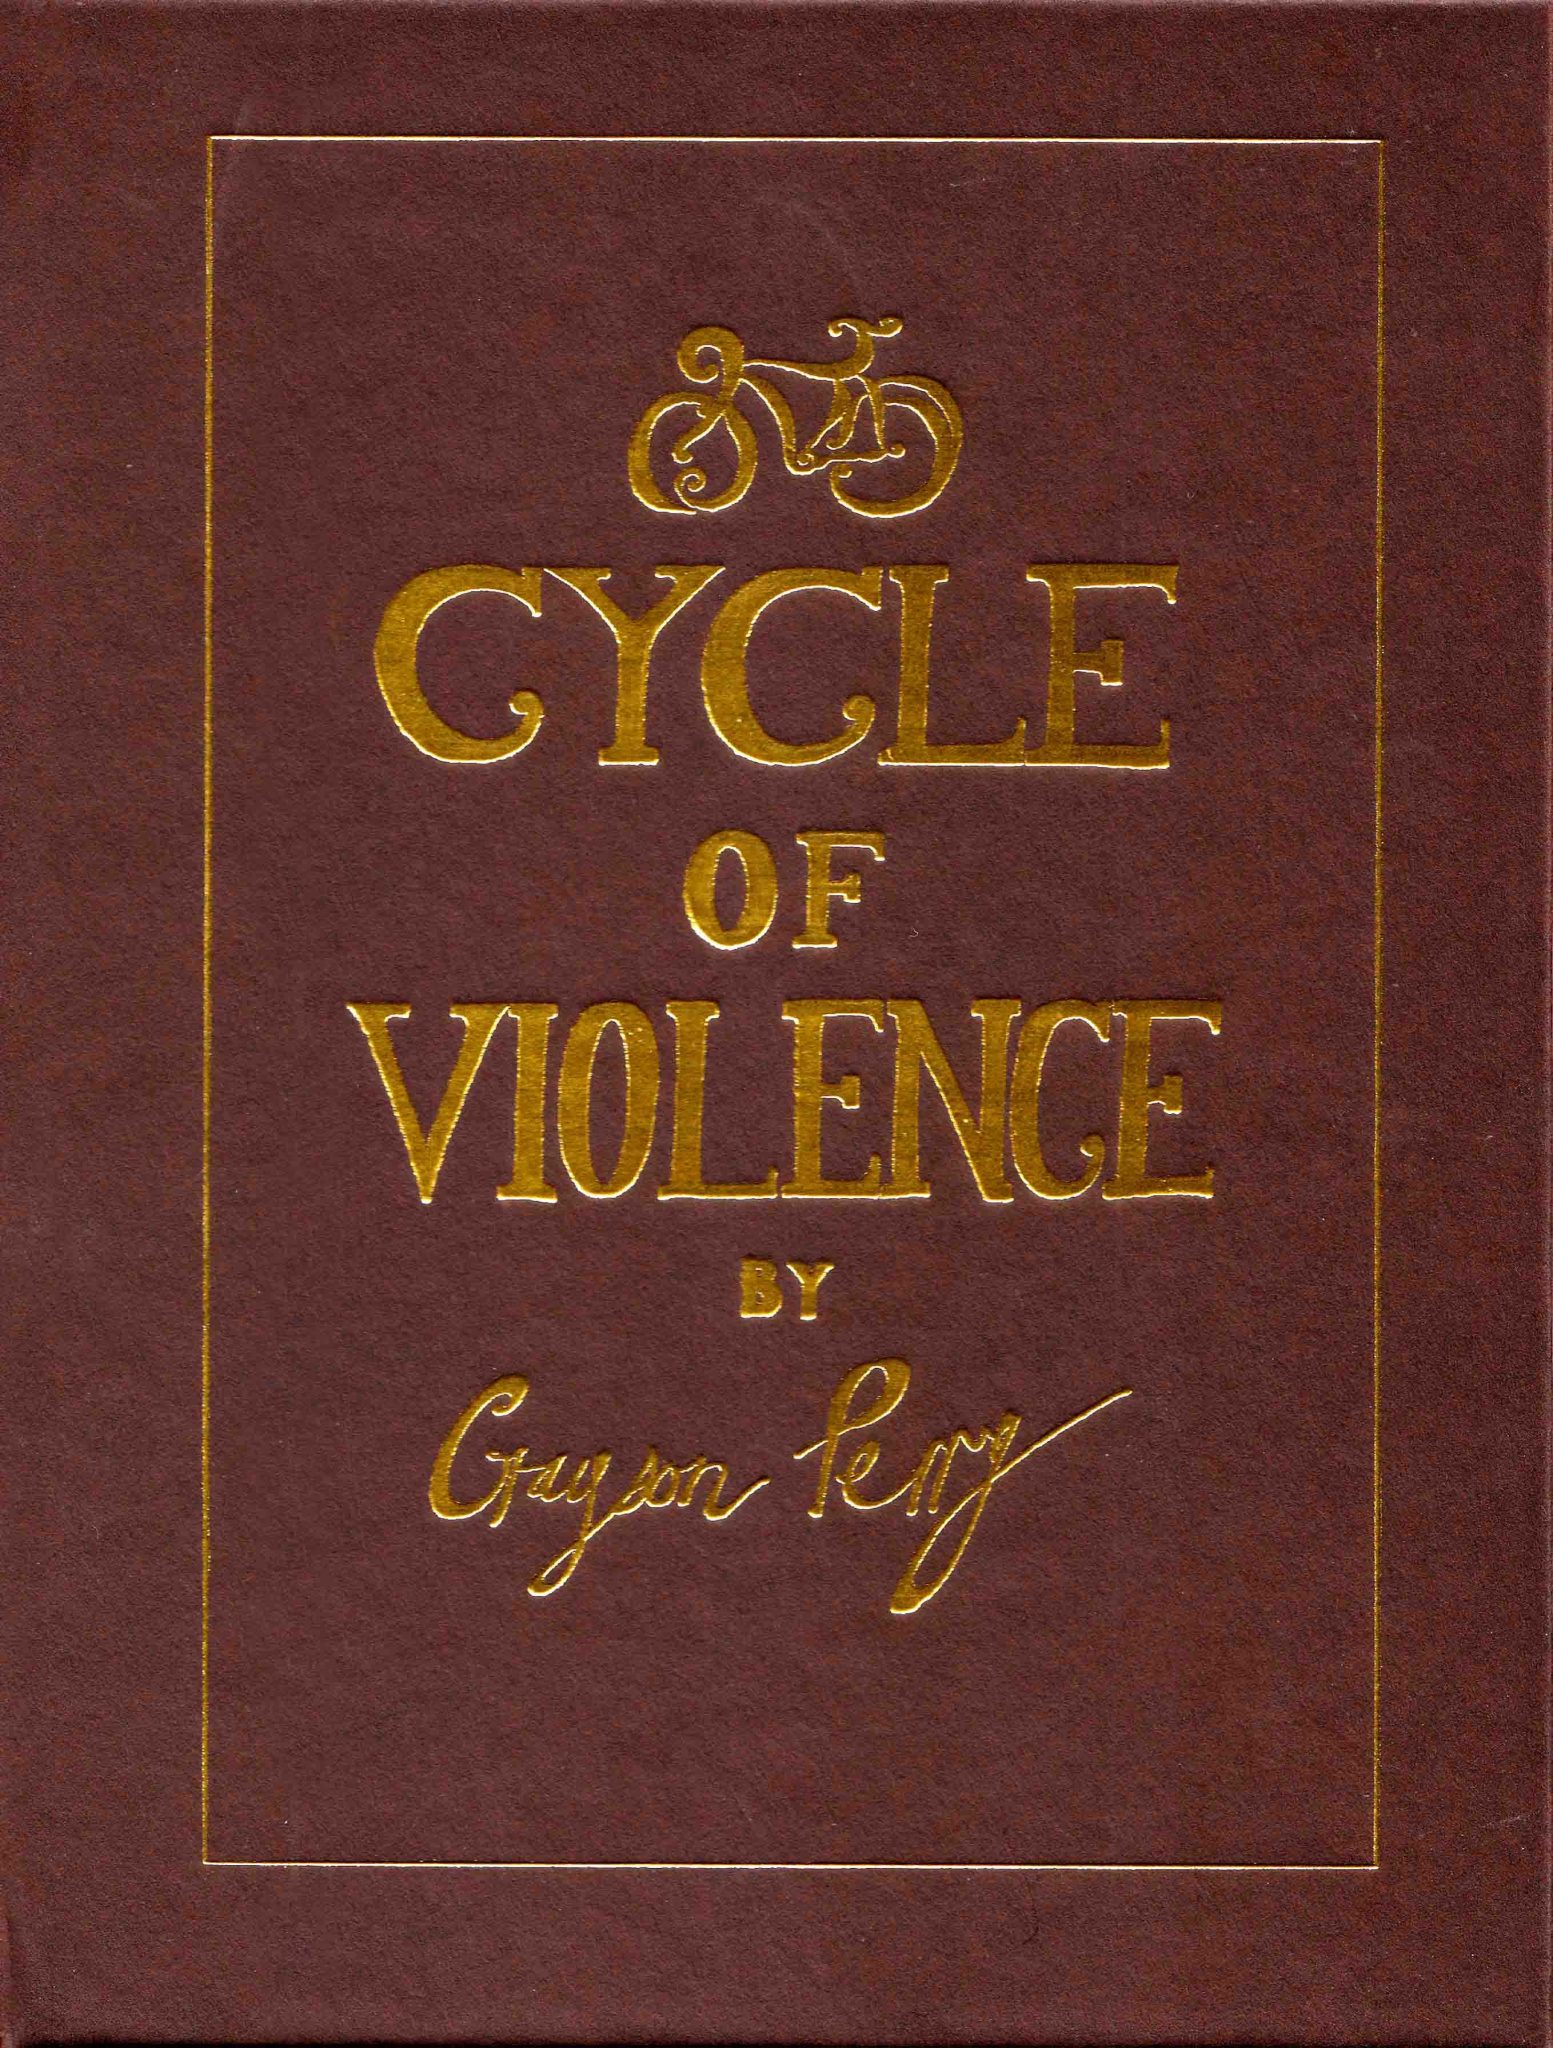 Book Review: Cycle of Violence